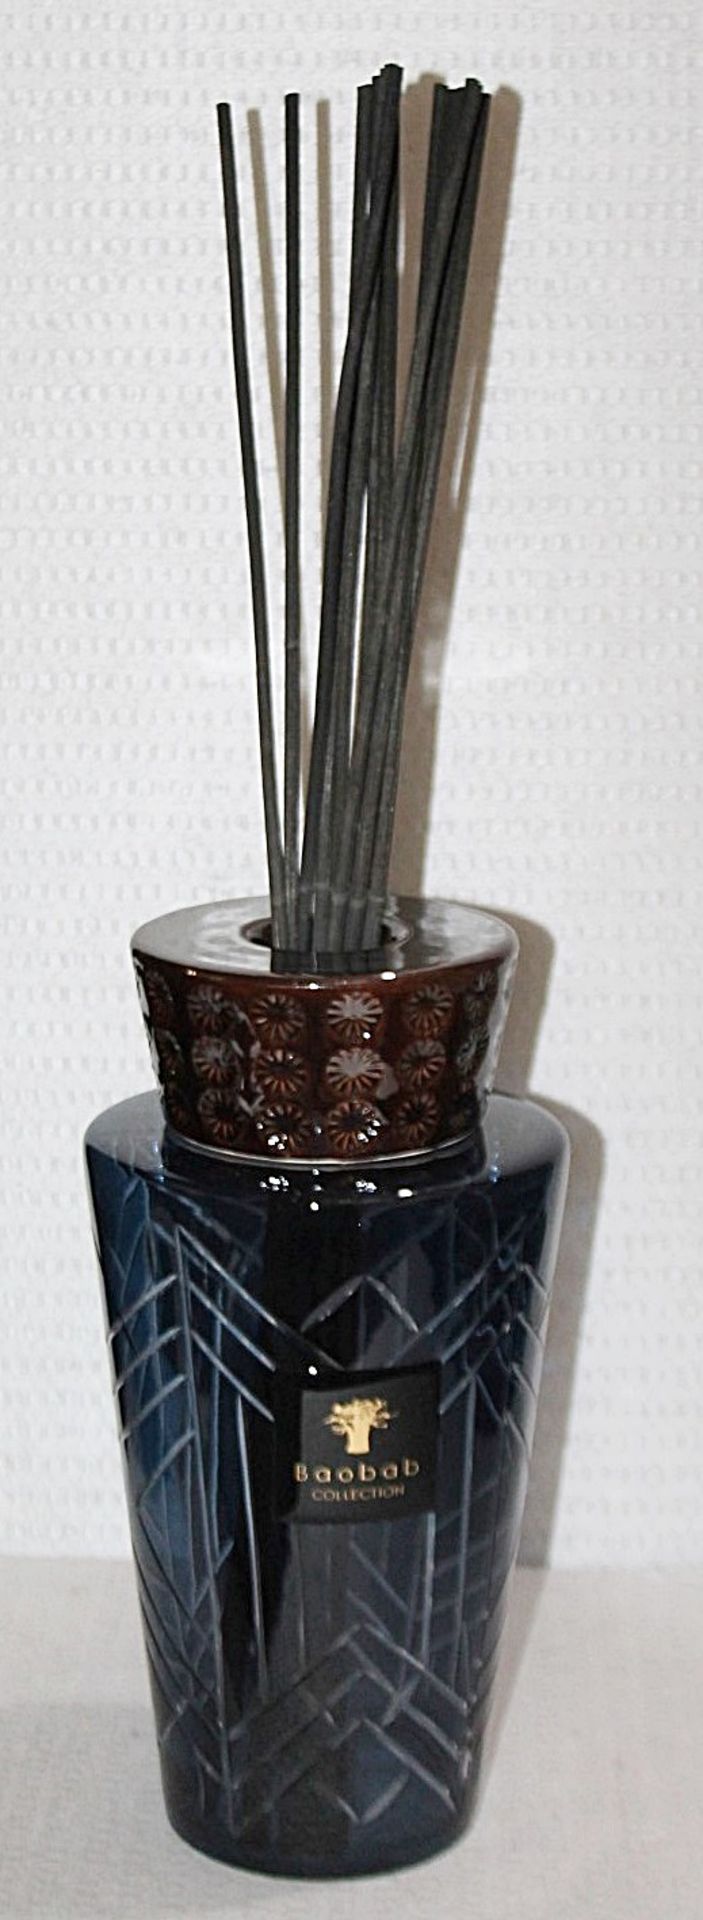 1 x BAOBAB COLLECTION 'Swann High Society' 5L Totem Diffuser - Original Price £715.00 - Image 4 of 8